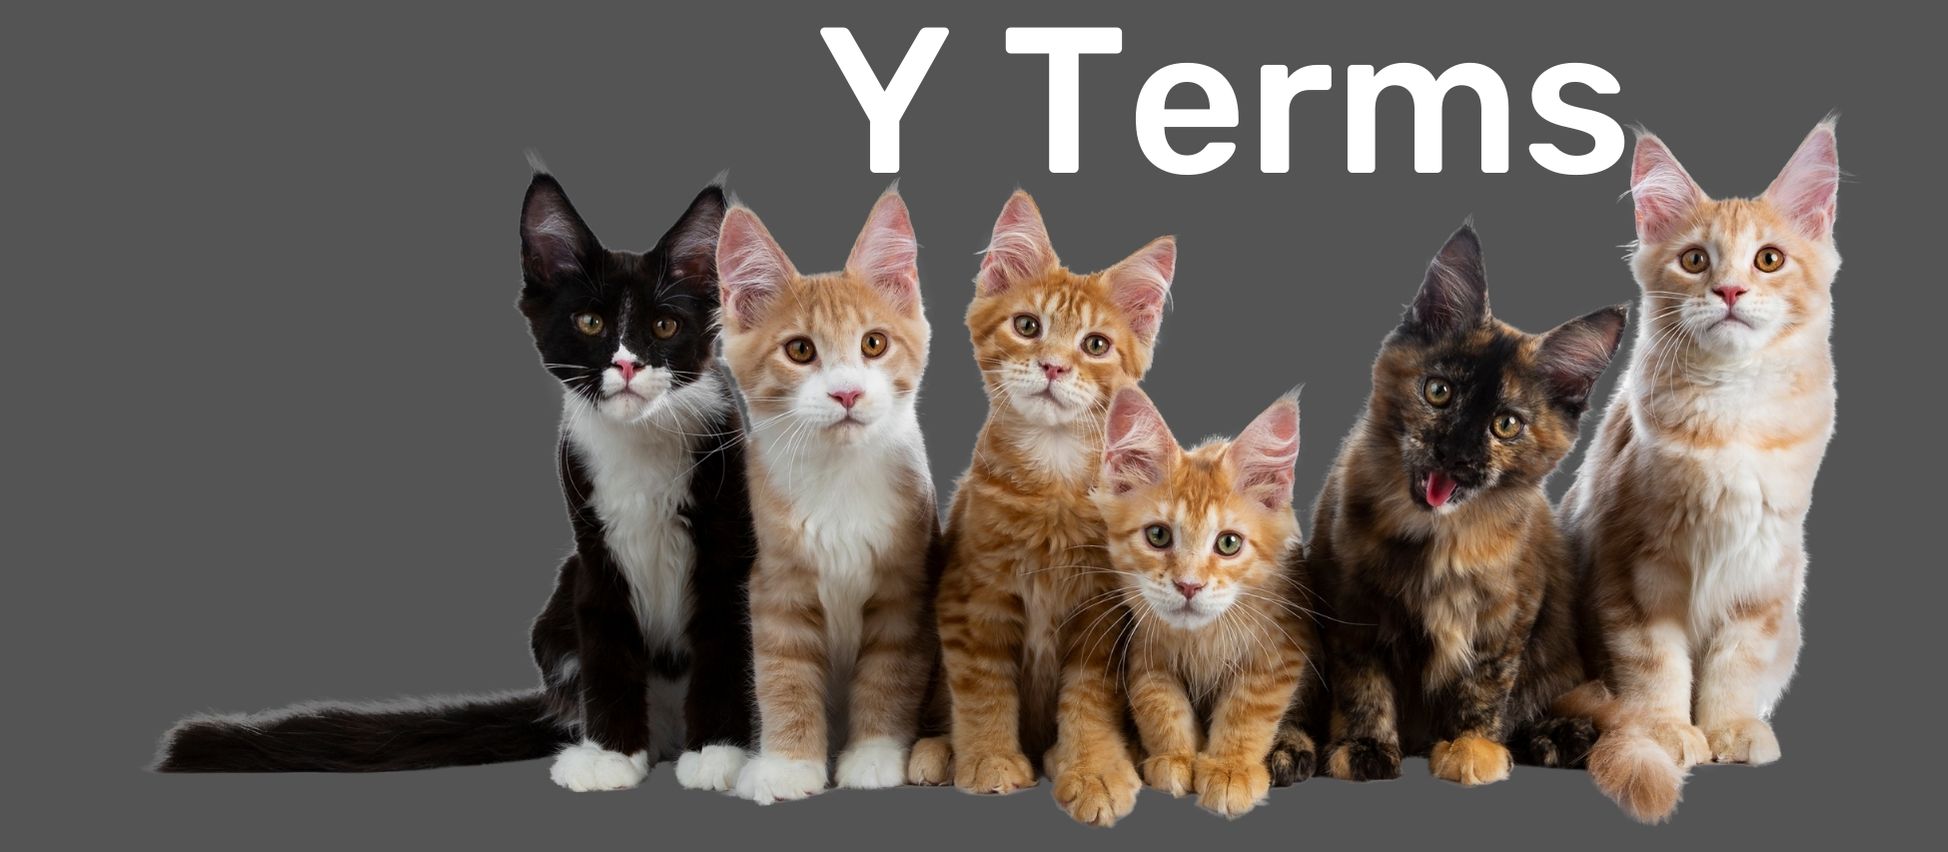 Group of six cats in front of a gray background with text reading 'Y Terms' at the top to indicate a new section of the glossary